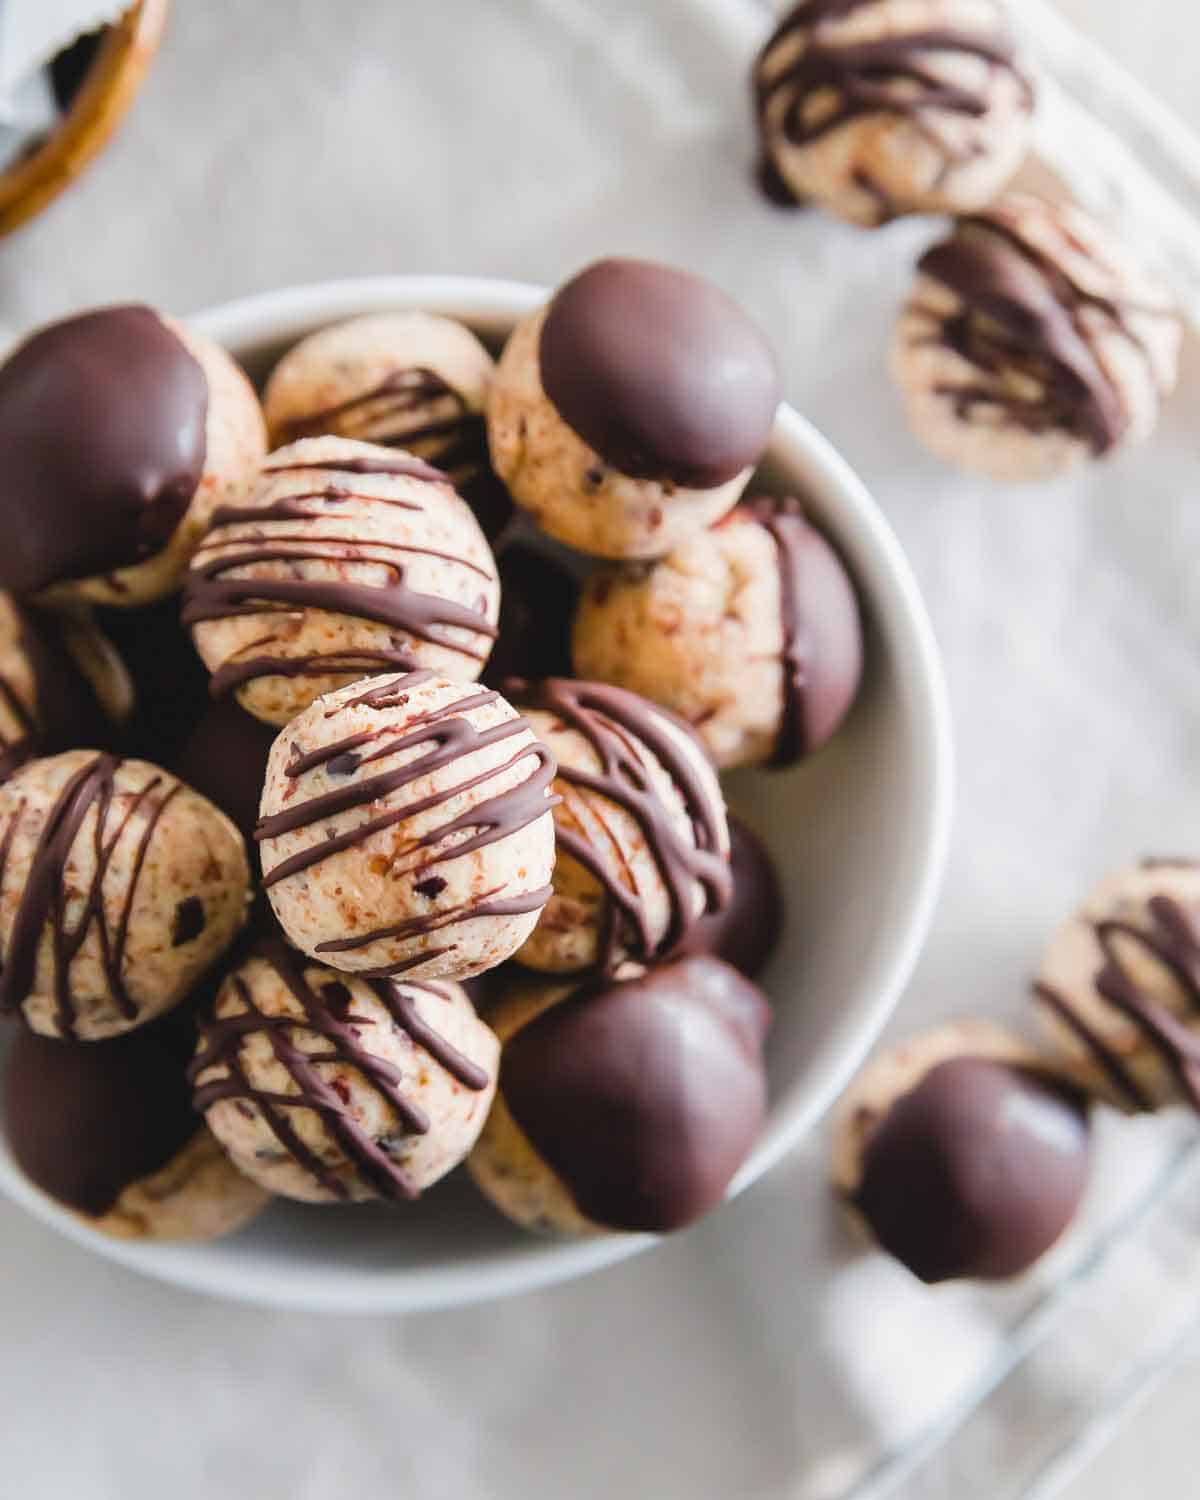 Healthy cookie dough bites made from leftover almond pulp (from making homemade almond milk) are such an easy treat so that nothing goes to waste. Don't worry - you can make these with almond flour too if you don't have almond pulp. Drizzled or dipped in chocolate, they're the ultimate vegan/gluten-free treat!